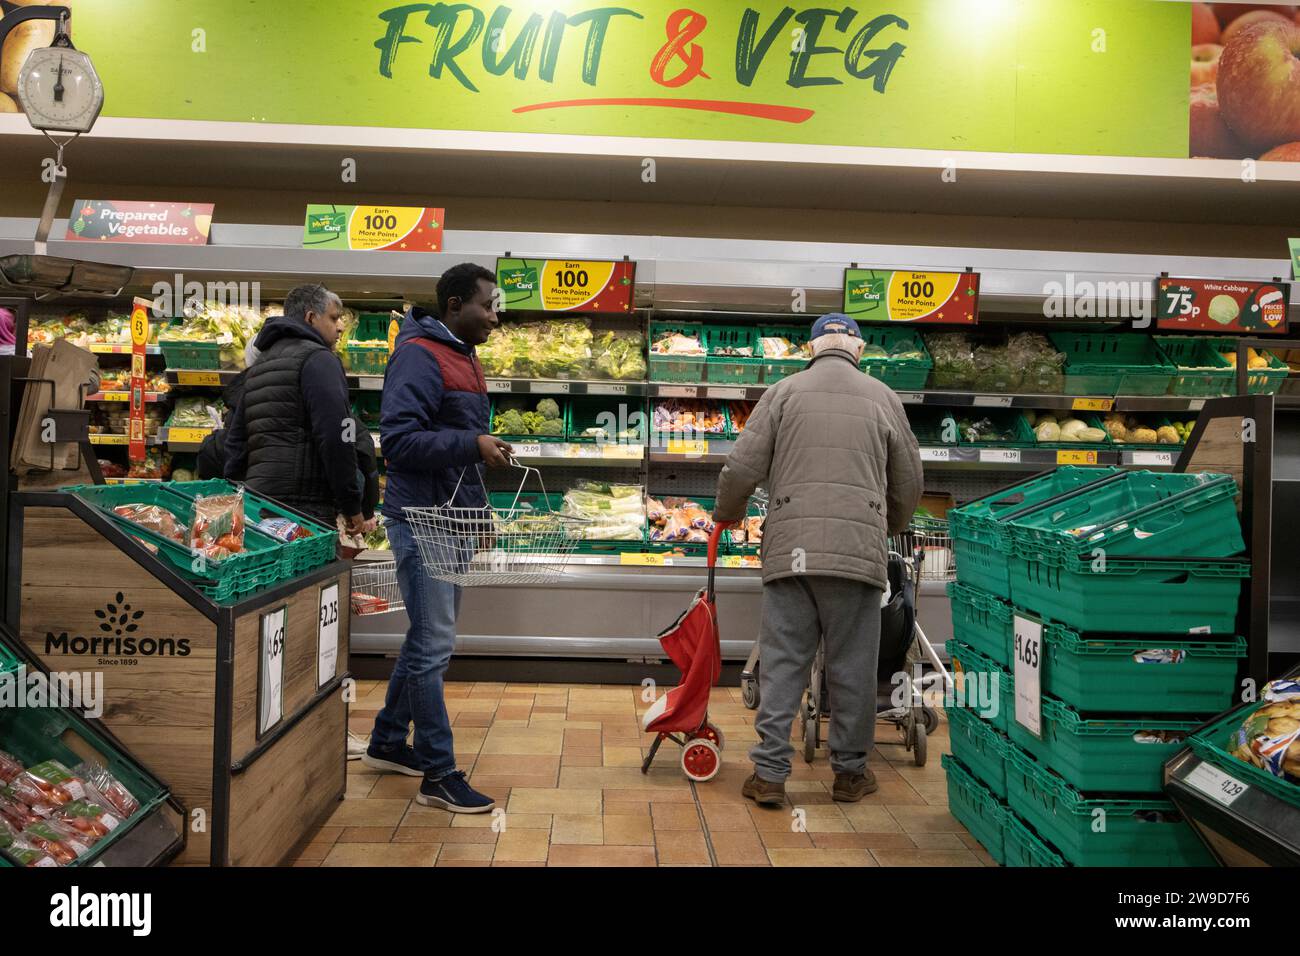 Shoppers at a Fruit & Veg aisle inside a Morrisons supermarket in central London, England, UK Stock Photo